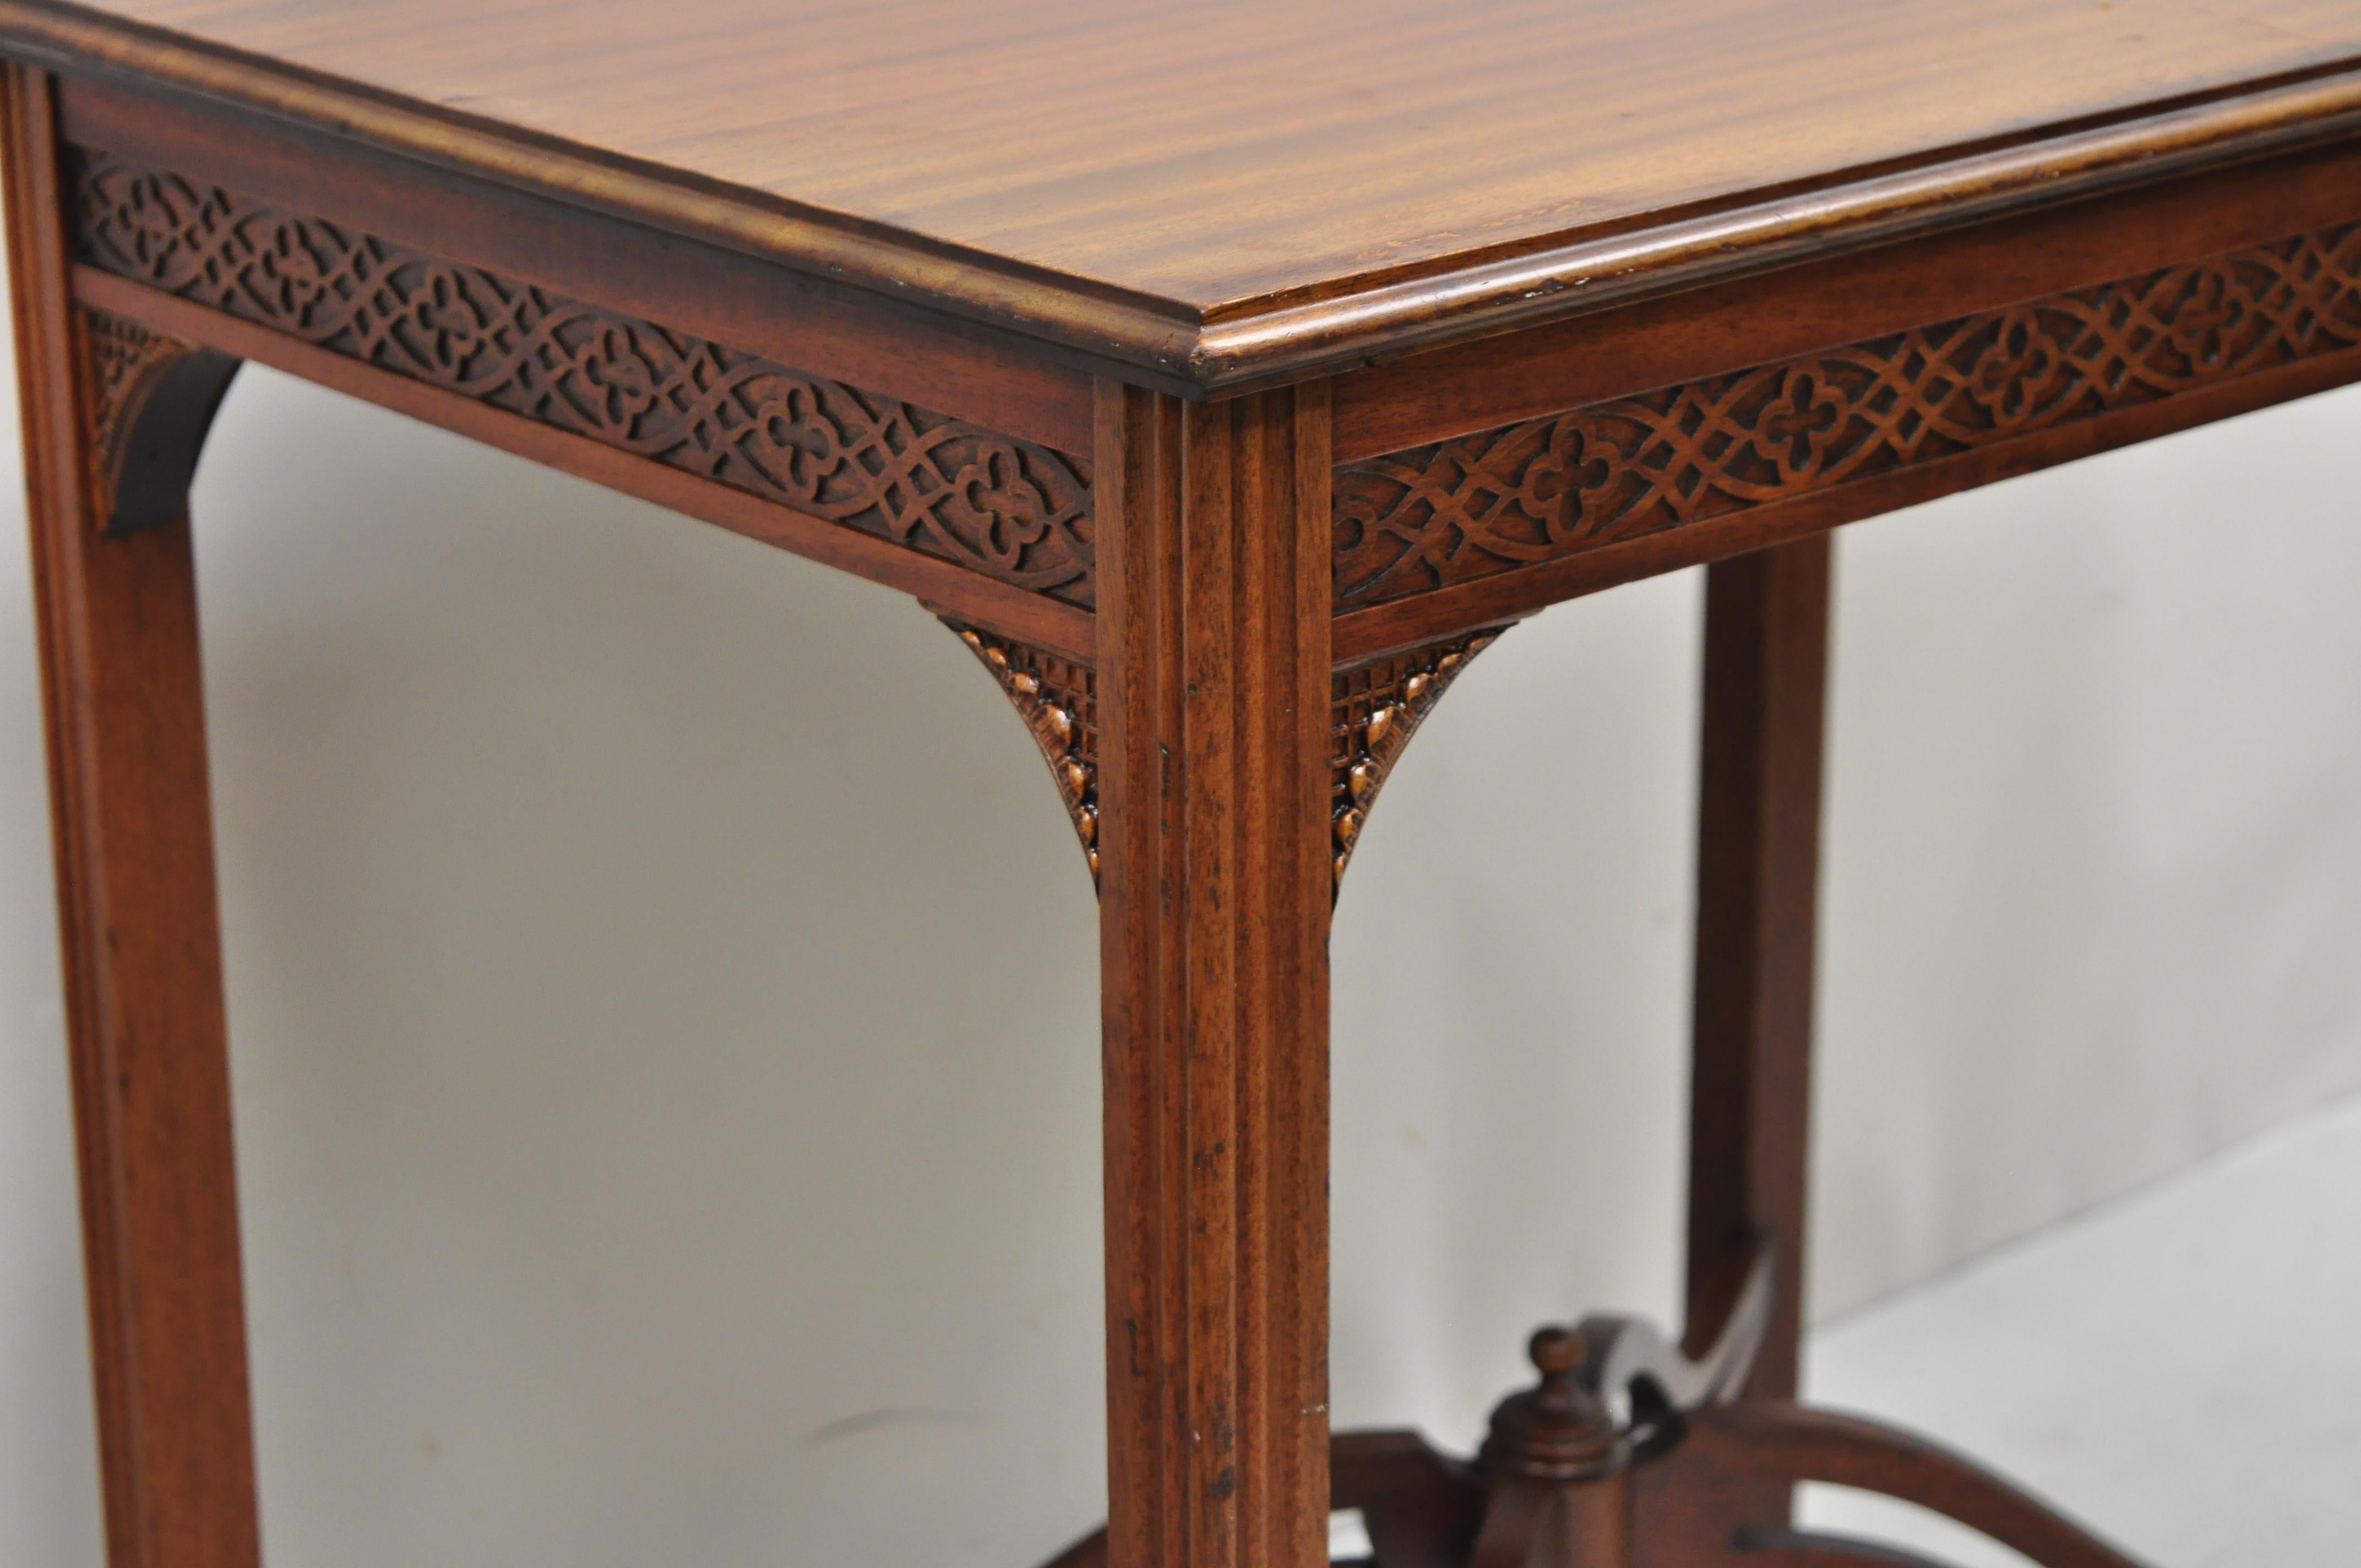 North American Vtg Mahogany Chinese Chippendale Fretwork Accent Lamp Side Table Elite Furniture